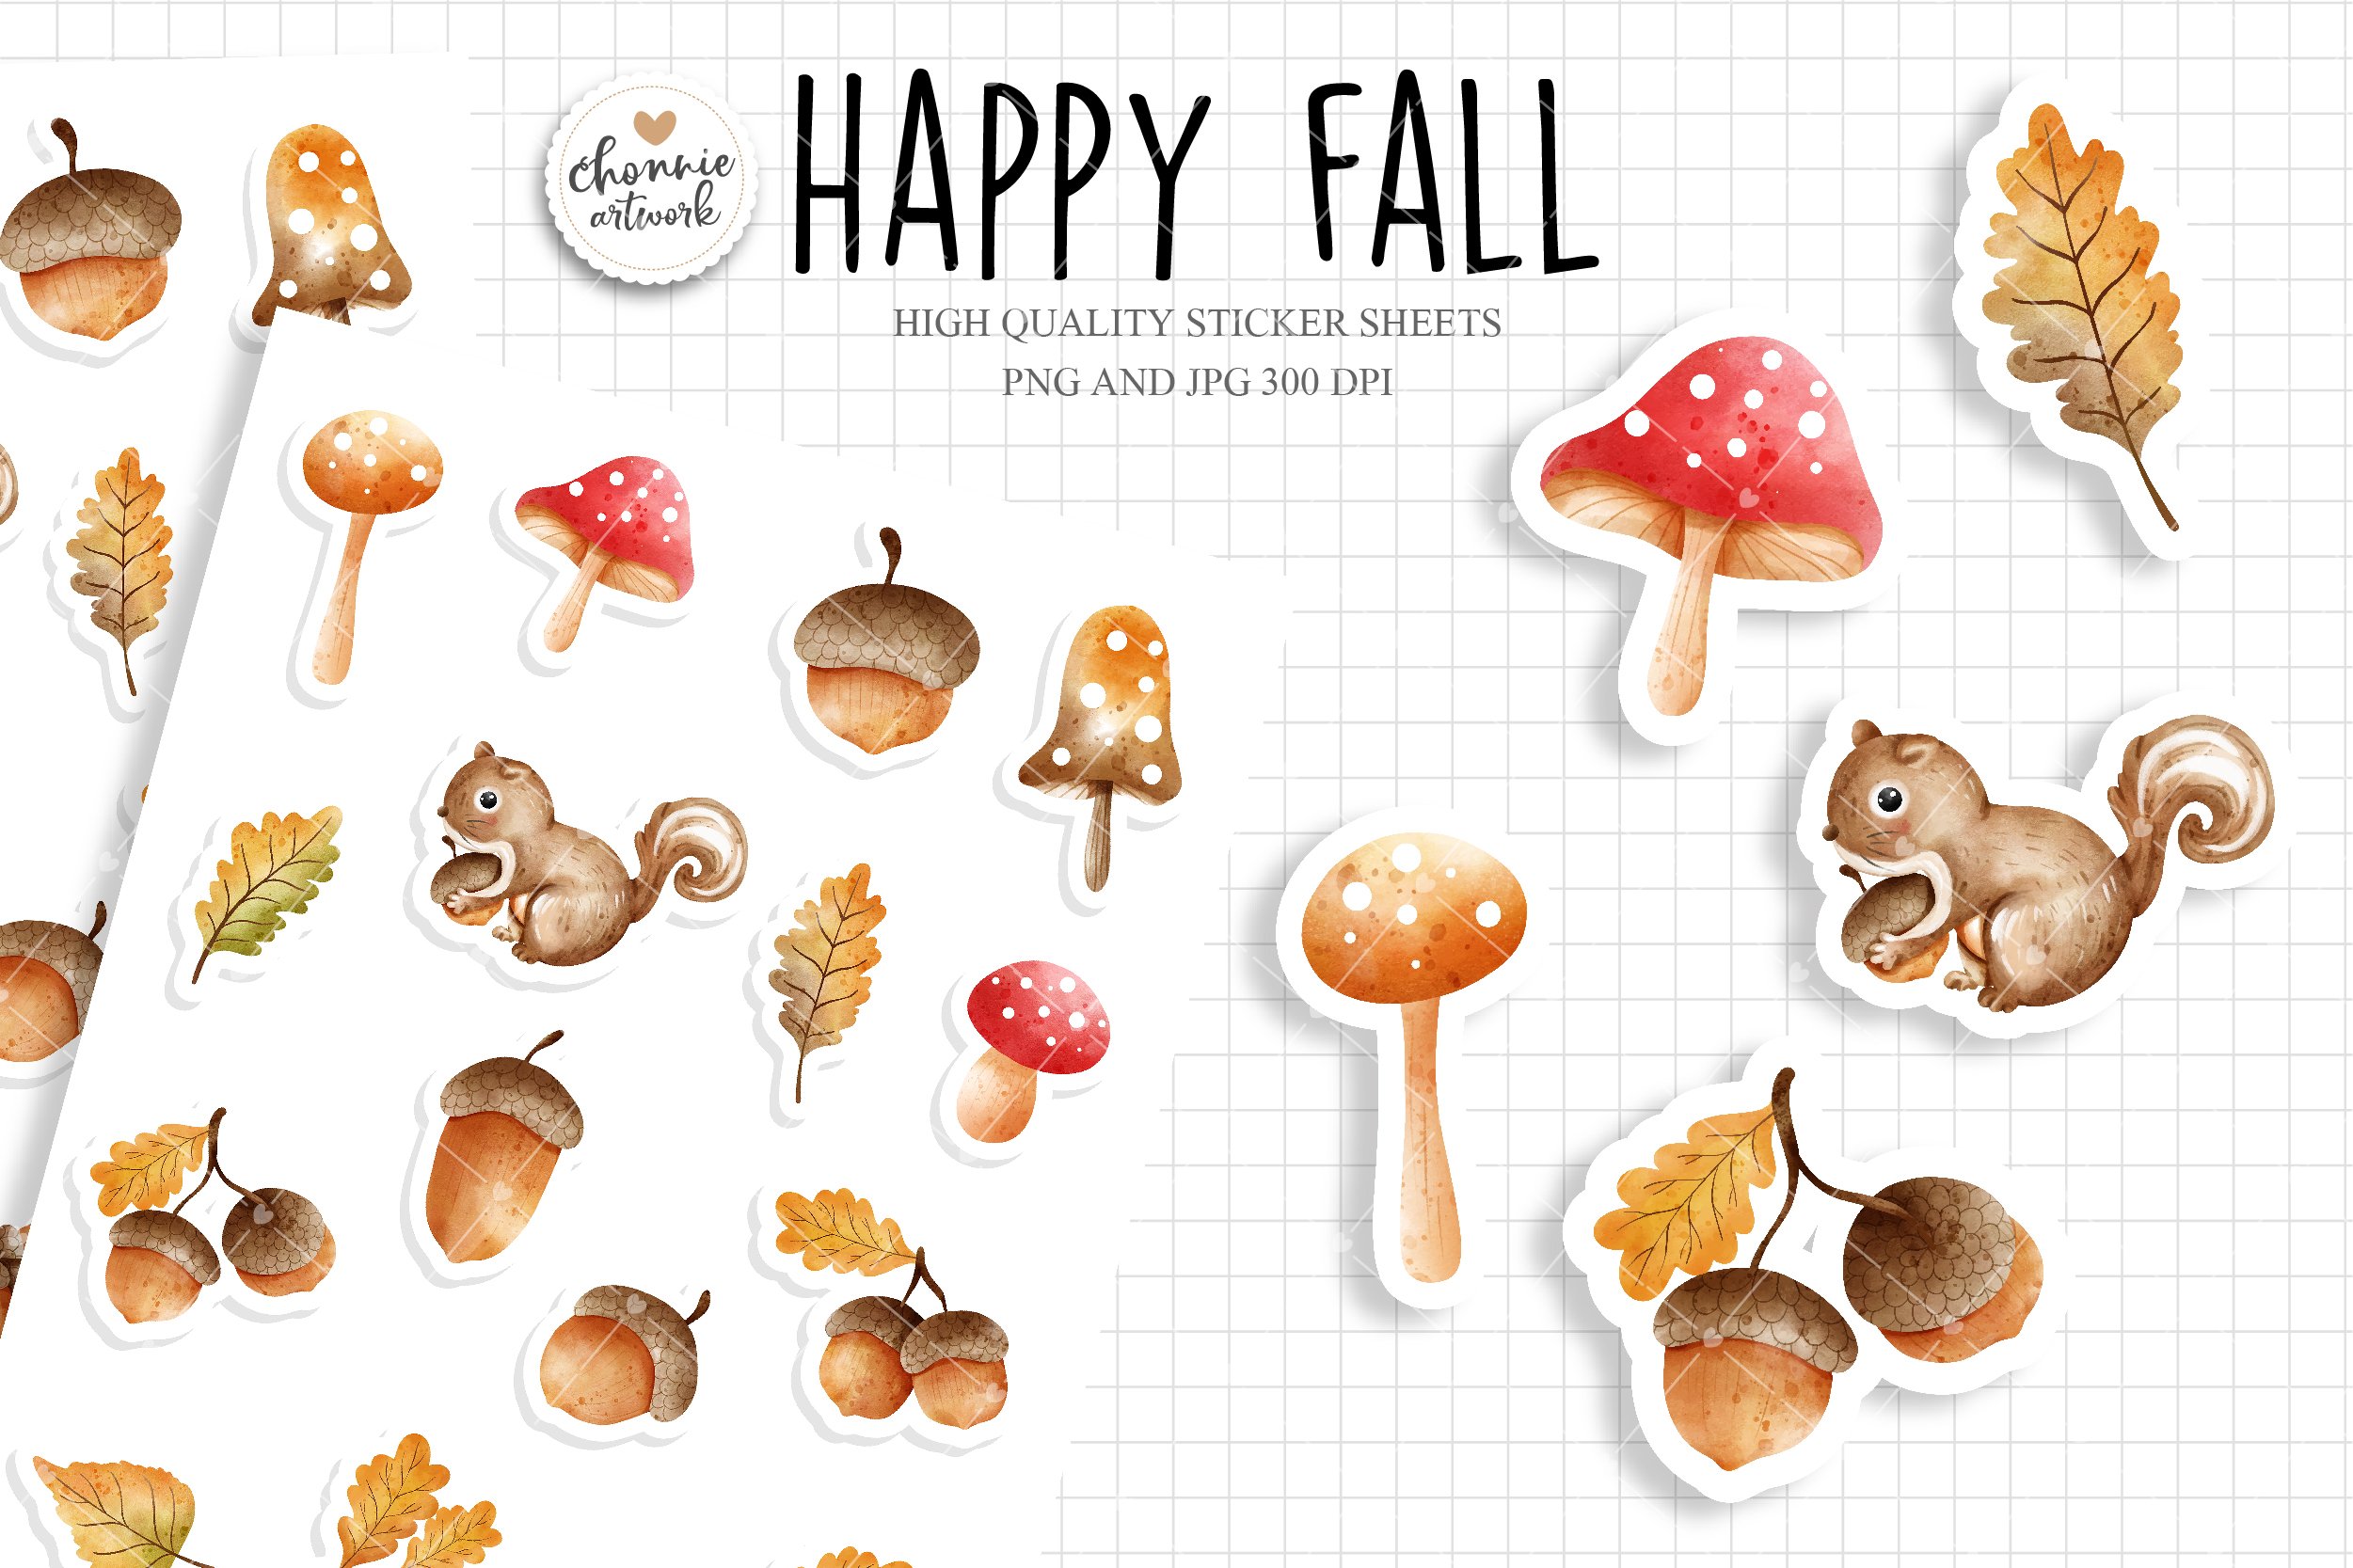 Acorn sticker sheets, happy fall cover image.